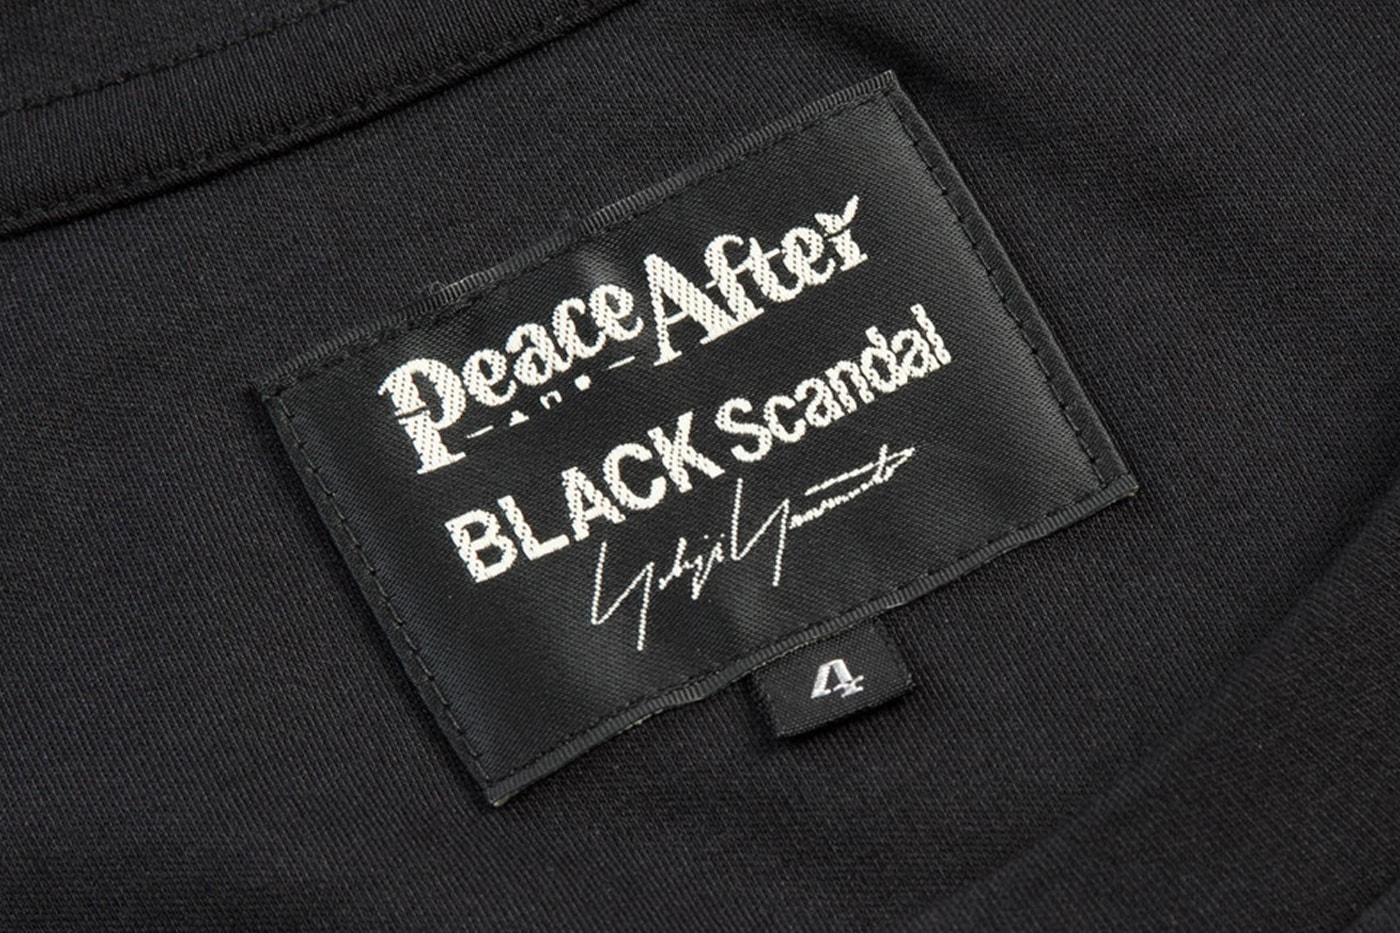 BLACK Scandal Yohji Yamamoto PEACE AND AFTER Capsule Release Hoodie Crewneck Sweater T Shirt Date Buy Price